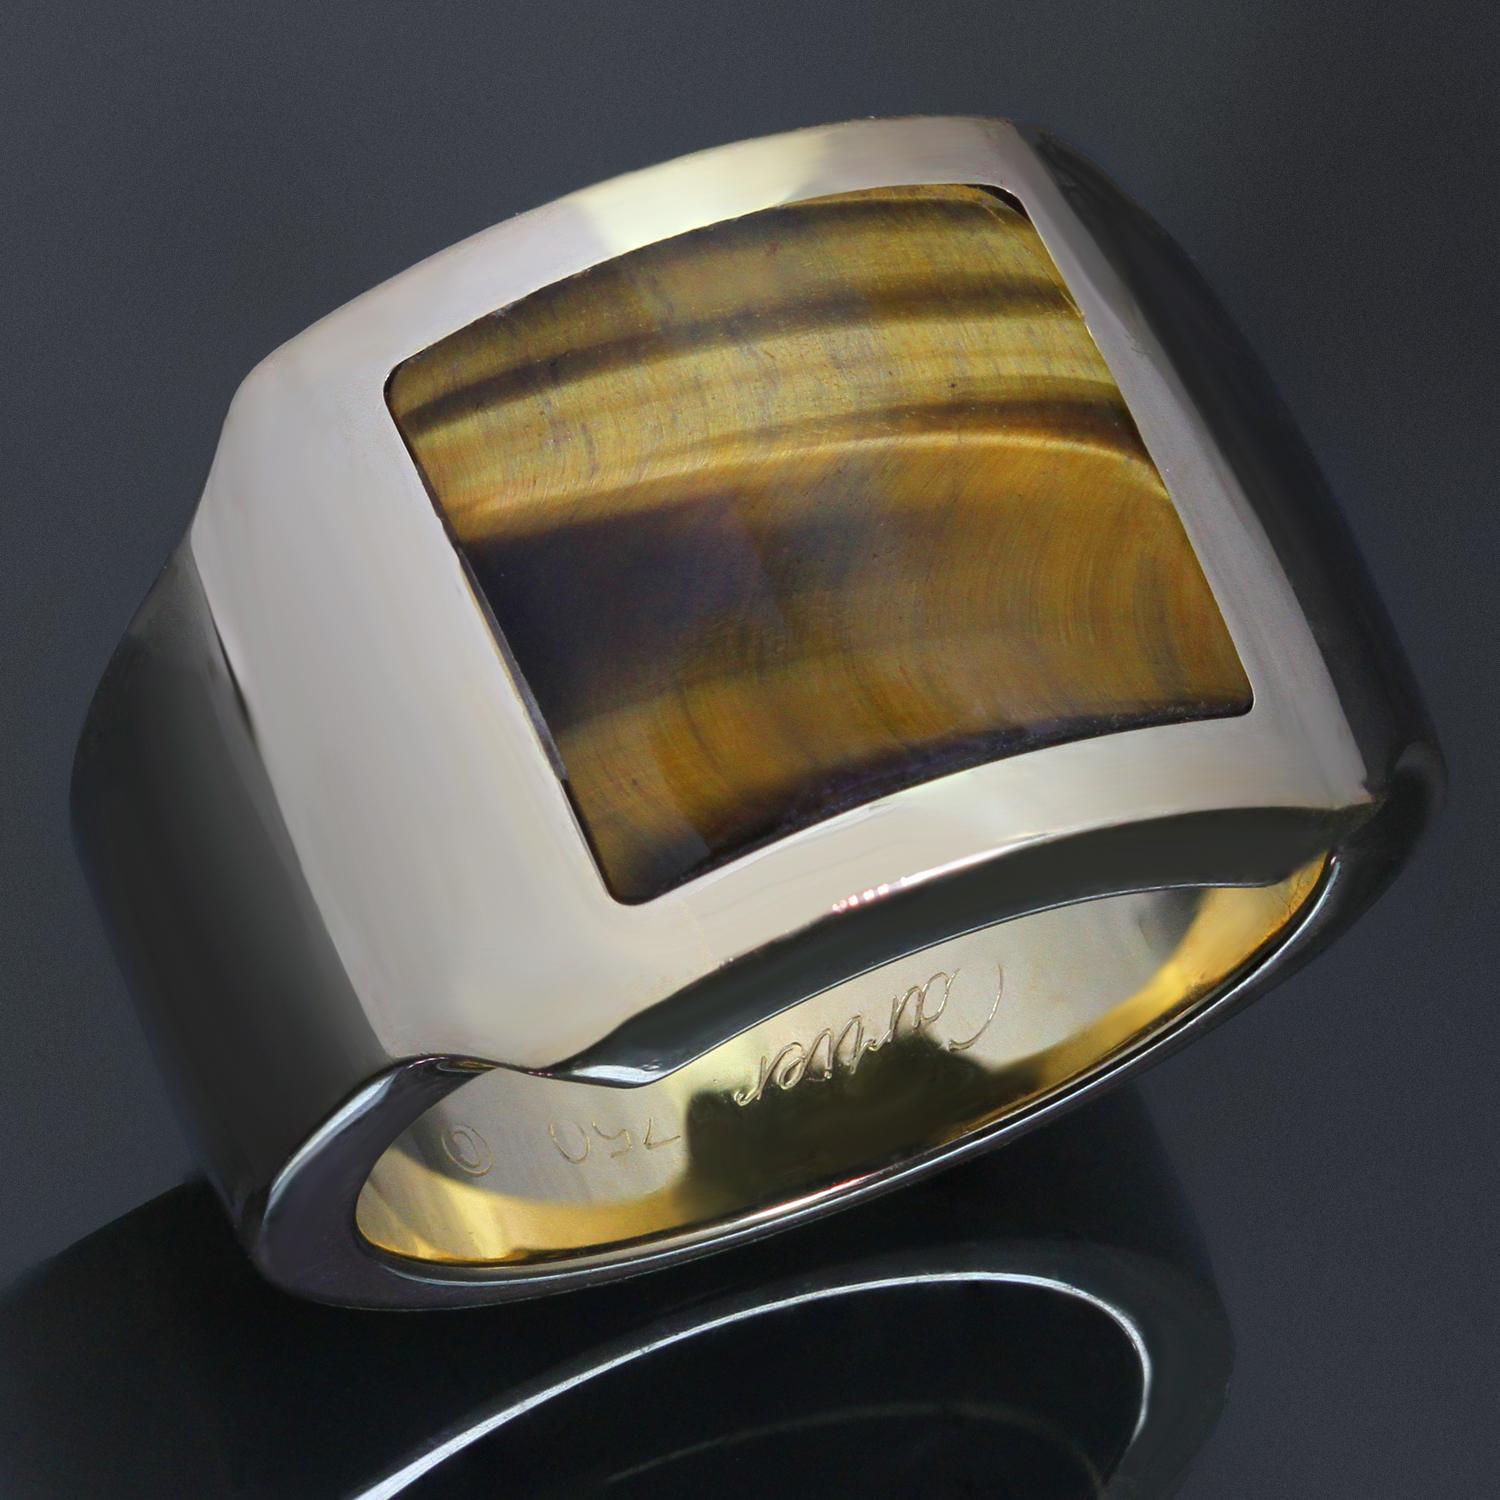 This rare Cartier men's ring from the classic Santos collection is crafted in 18k yellow gold and set with square-shaped tiger eye gemstone. Made in France circa 1990s. Measurements: 0.62